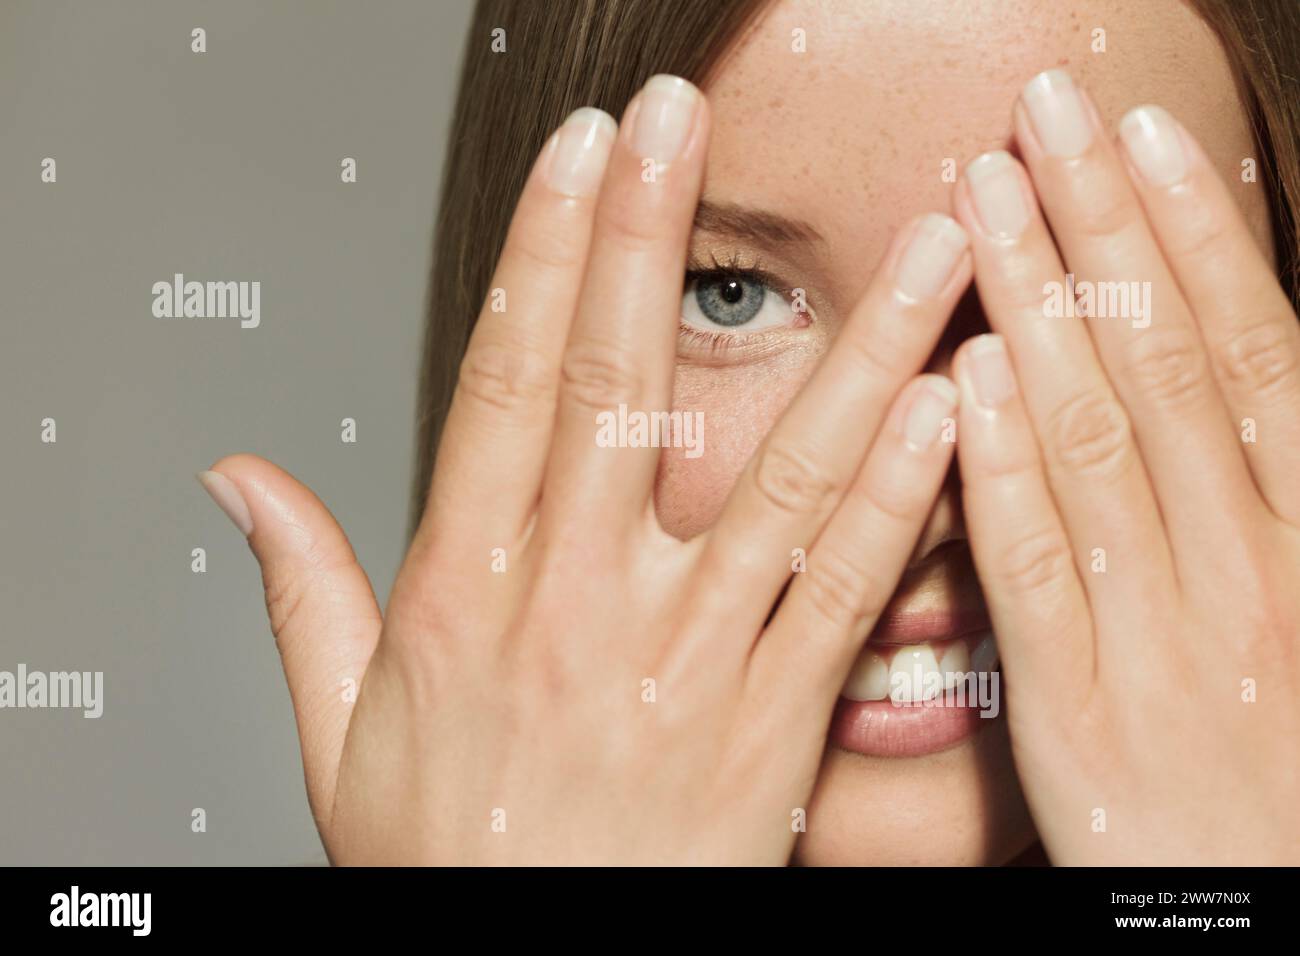 Woman with Hands over Eyes Smiling Stock Photo